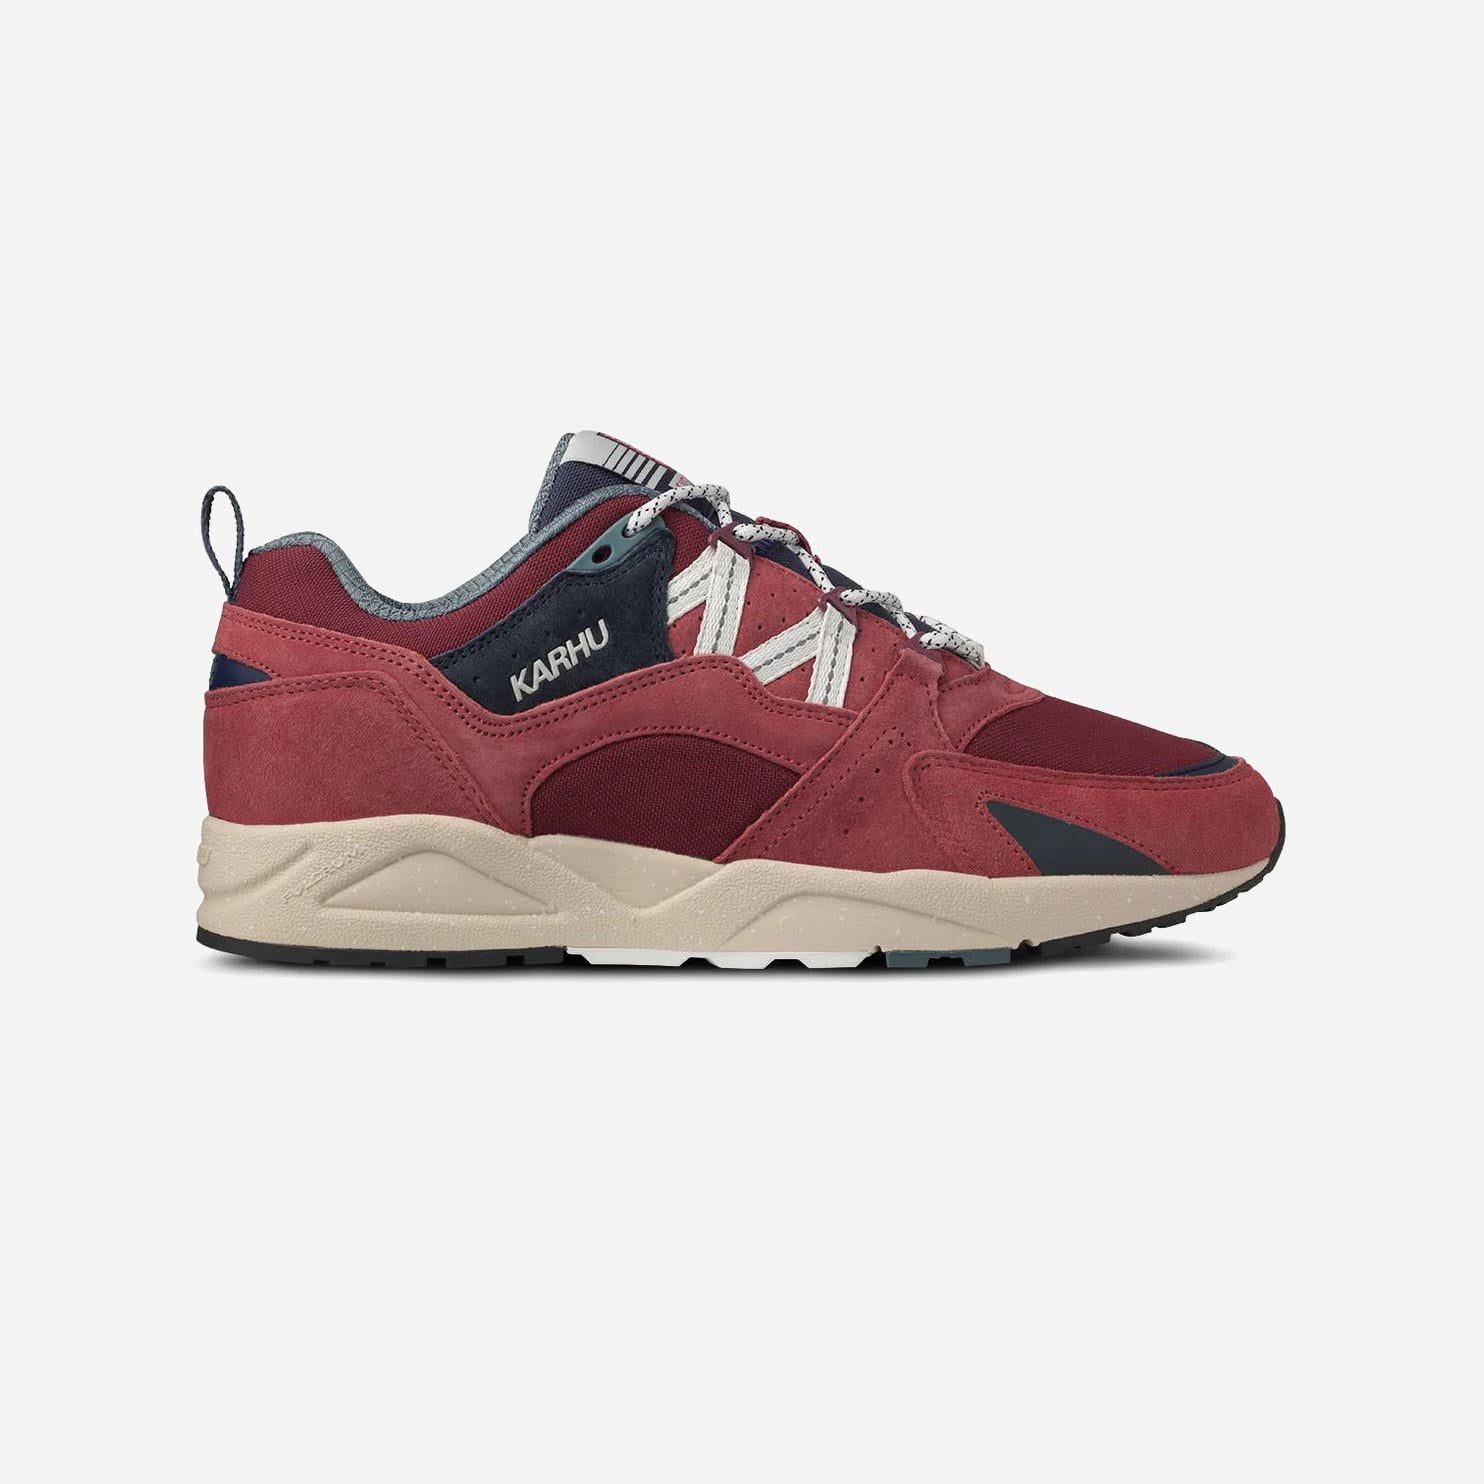 Karhu Fusion 2.0 Trainer - Mineral Red/Lily White